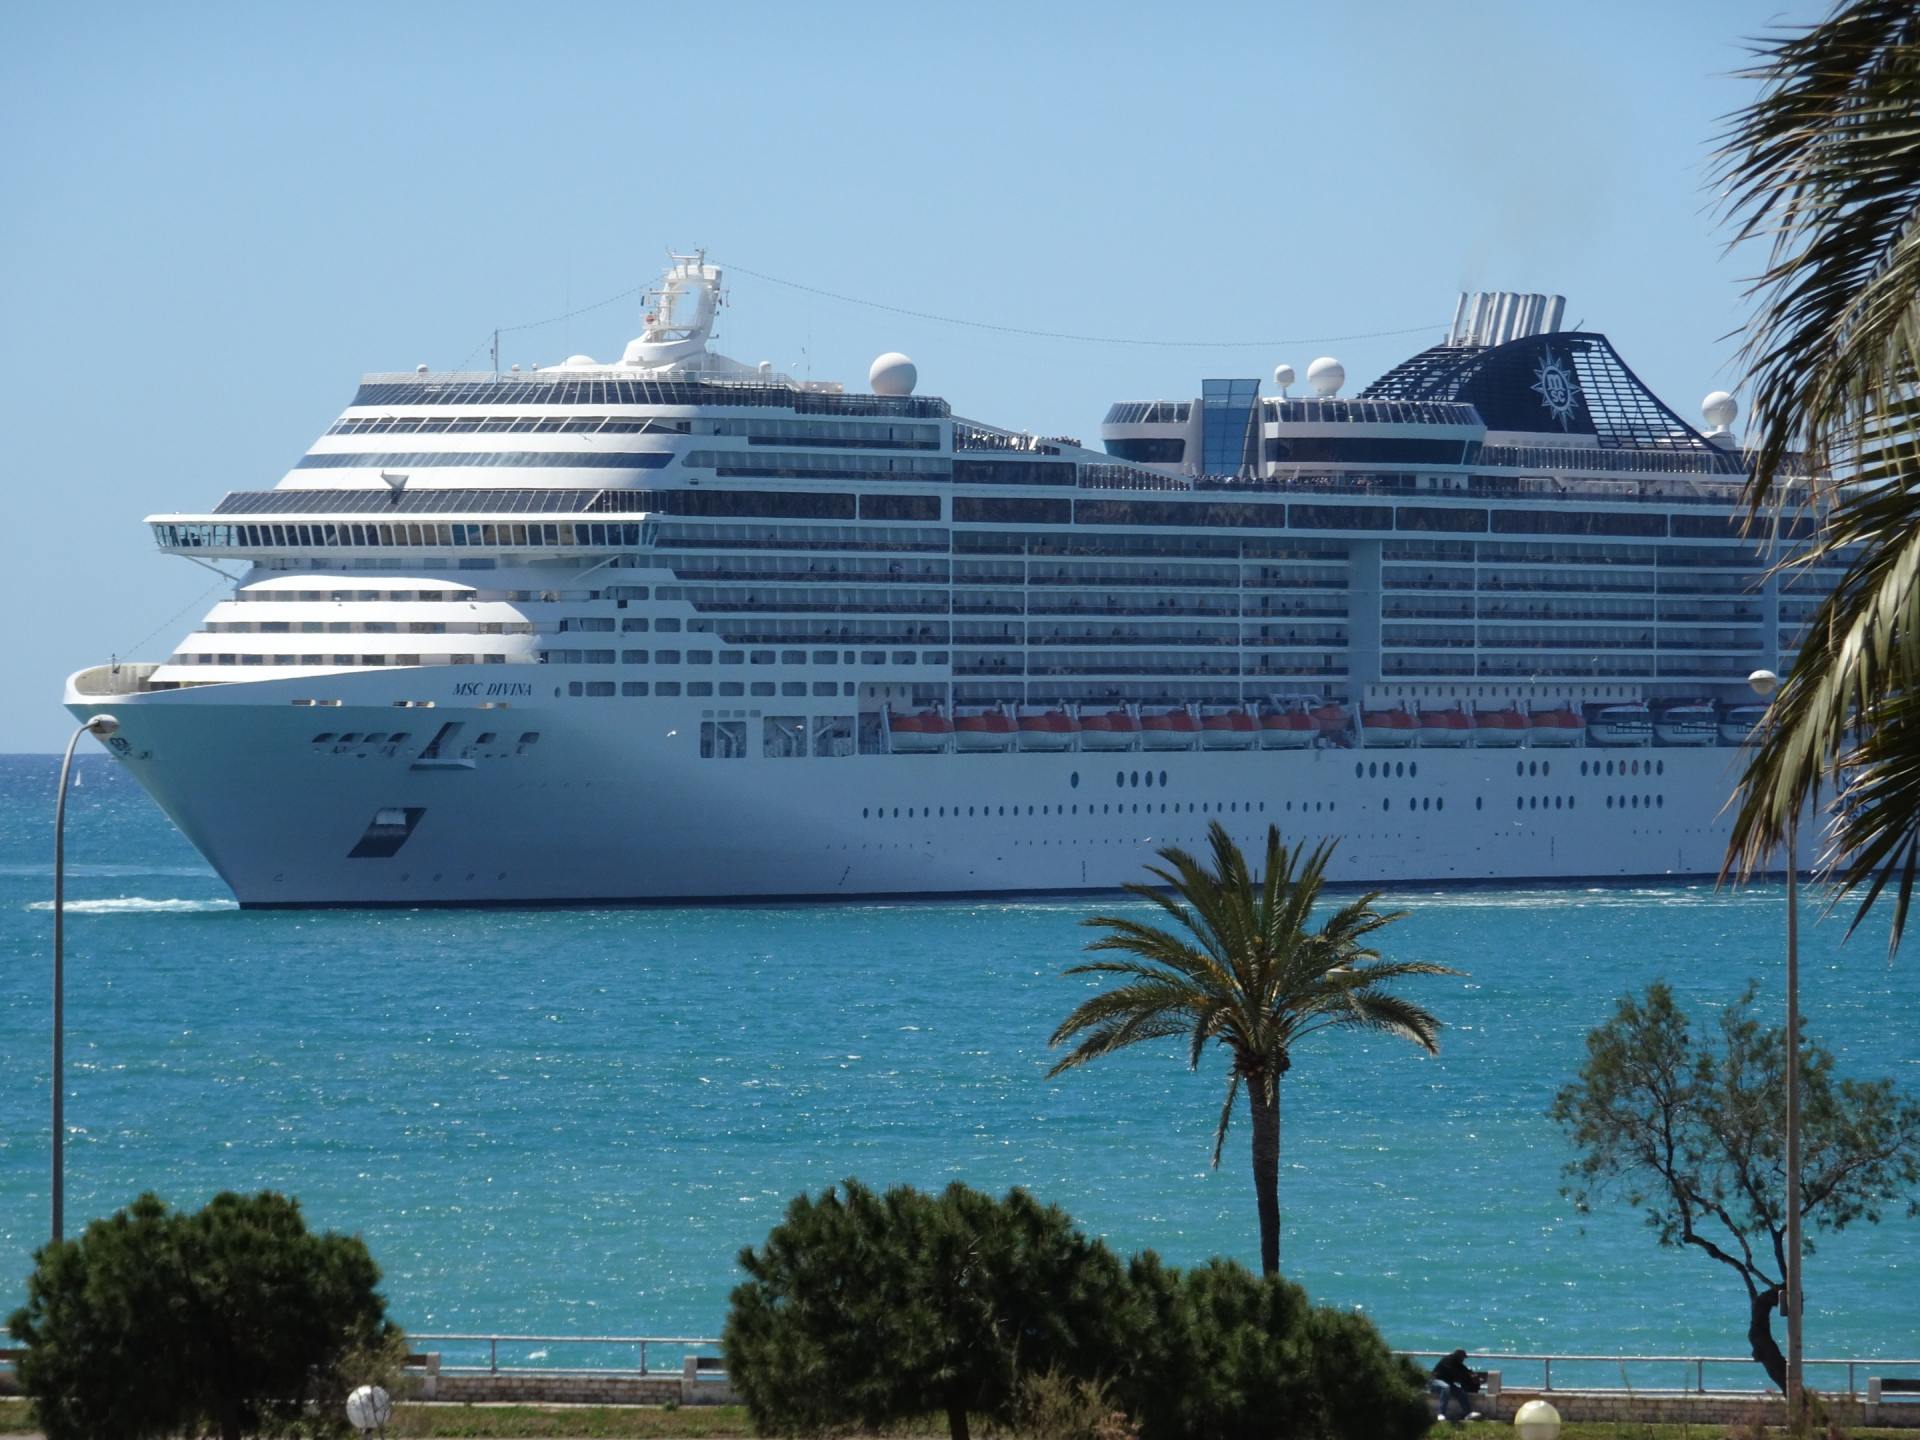 large cruise ship near land with palm trees